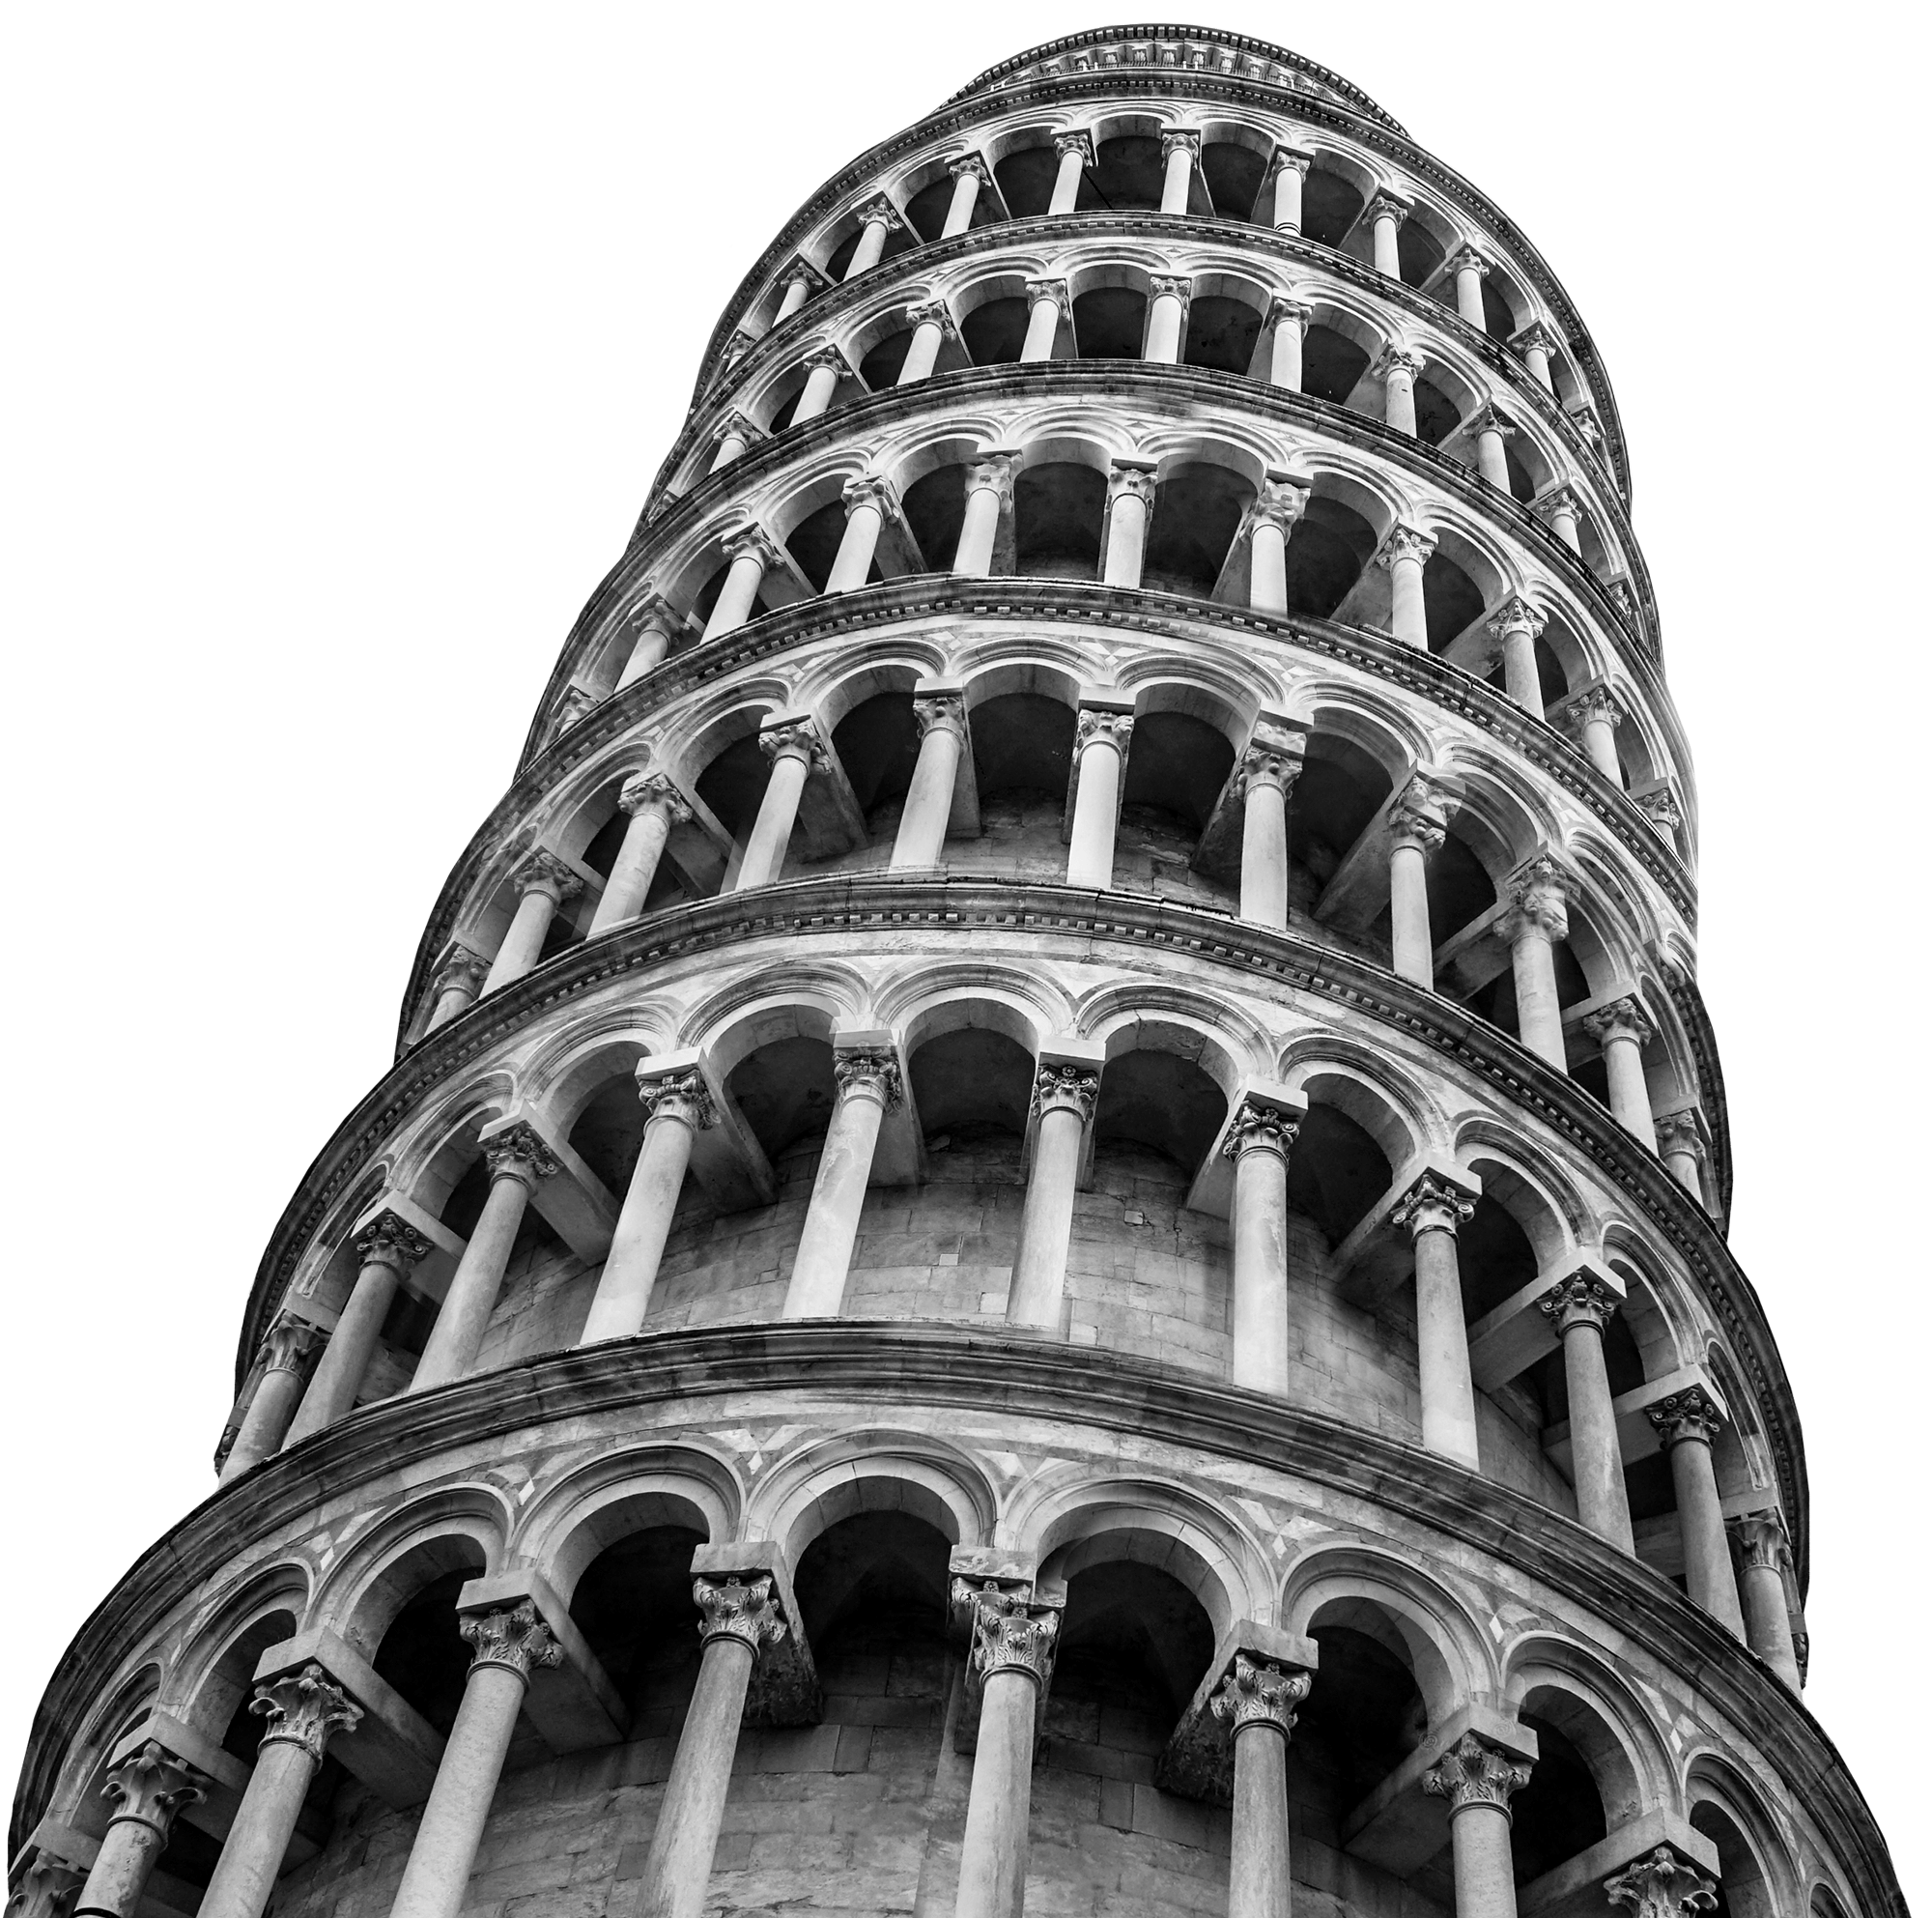 Italy Leaning Tower 